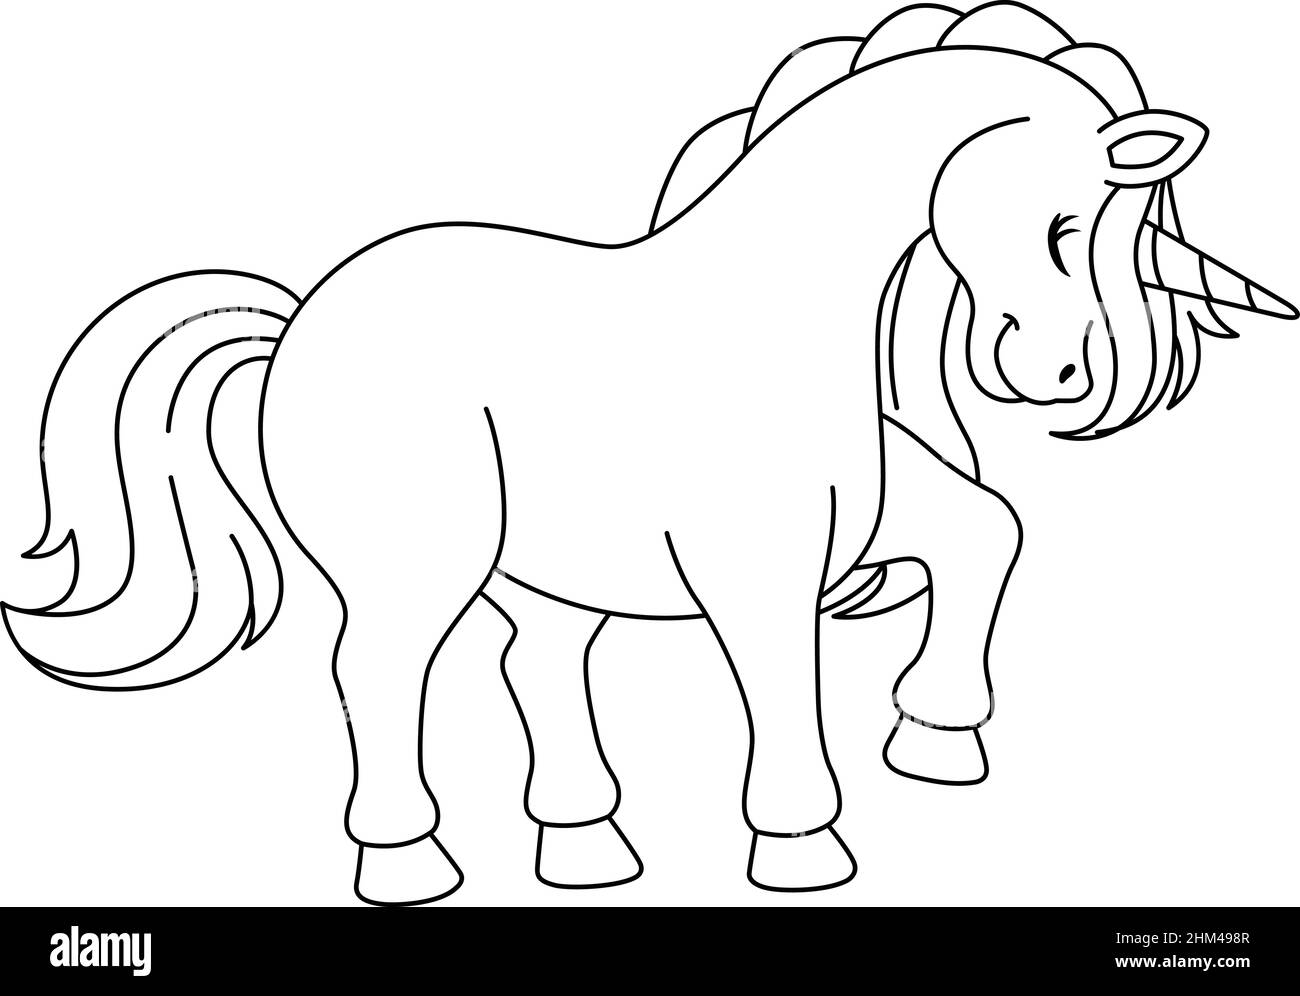 Unicorn In A Forest Coloring Page Isolated  Stock Vector